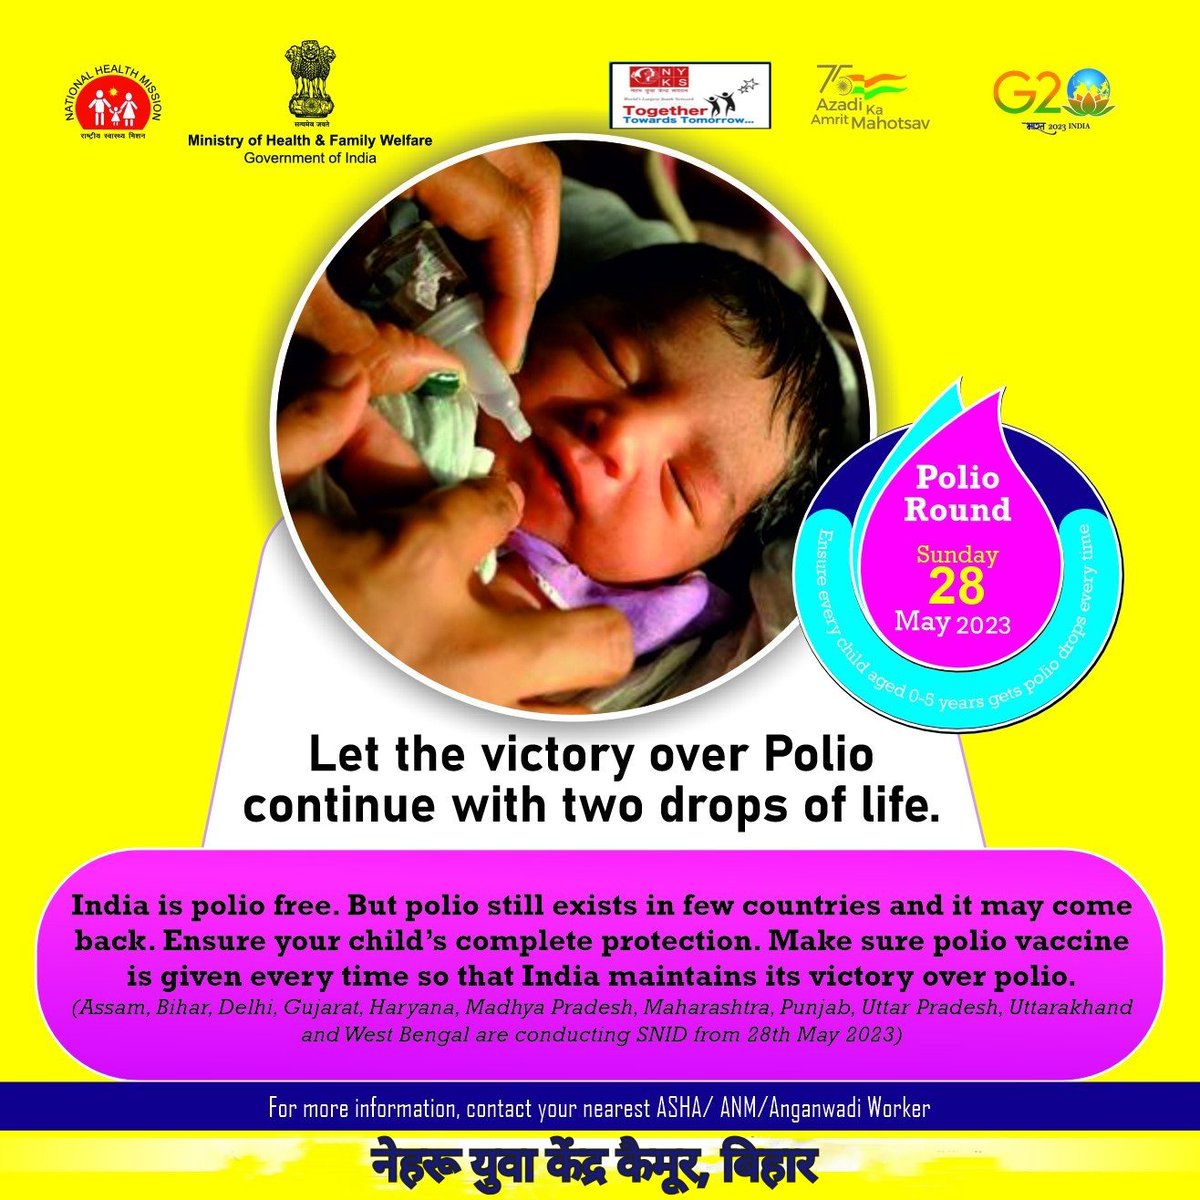 Let’s ensure that all our children below 5 years of age get their dose of Polio drops every time.
 
 #SwasthaBharat #PolioMuktBharat #SNID2023